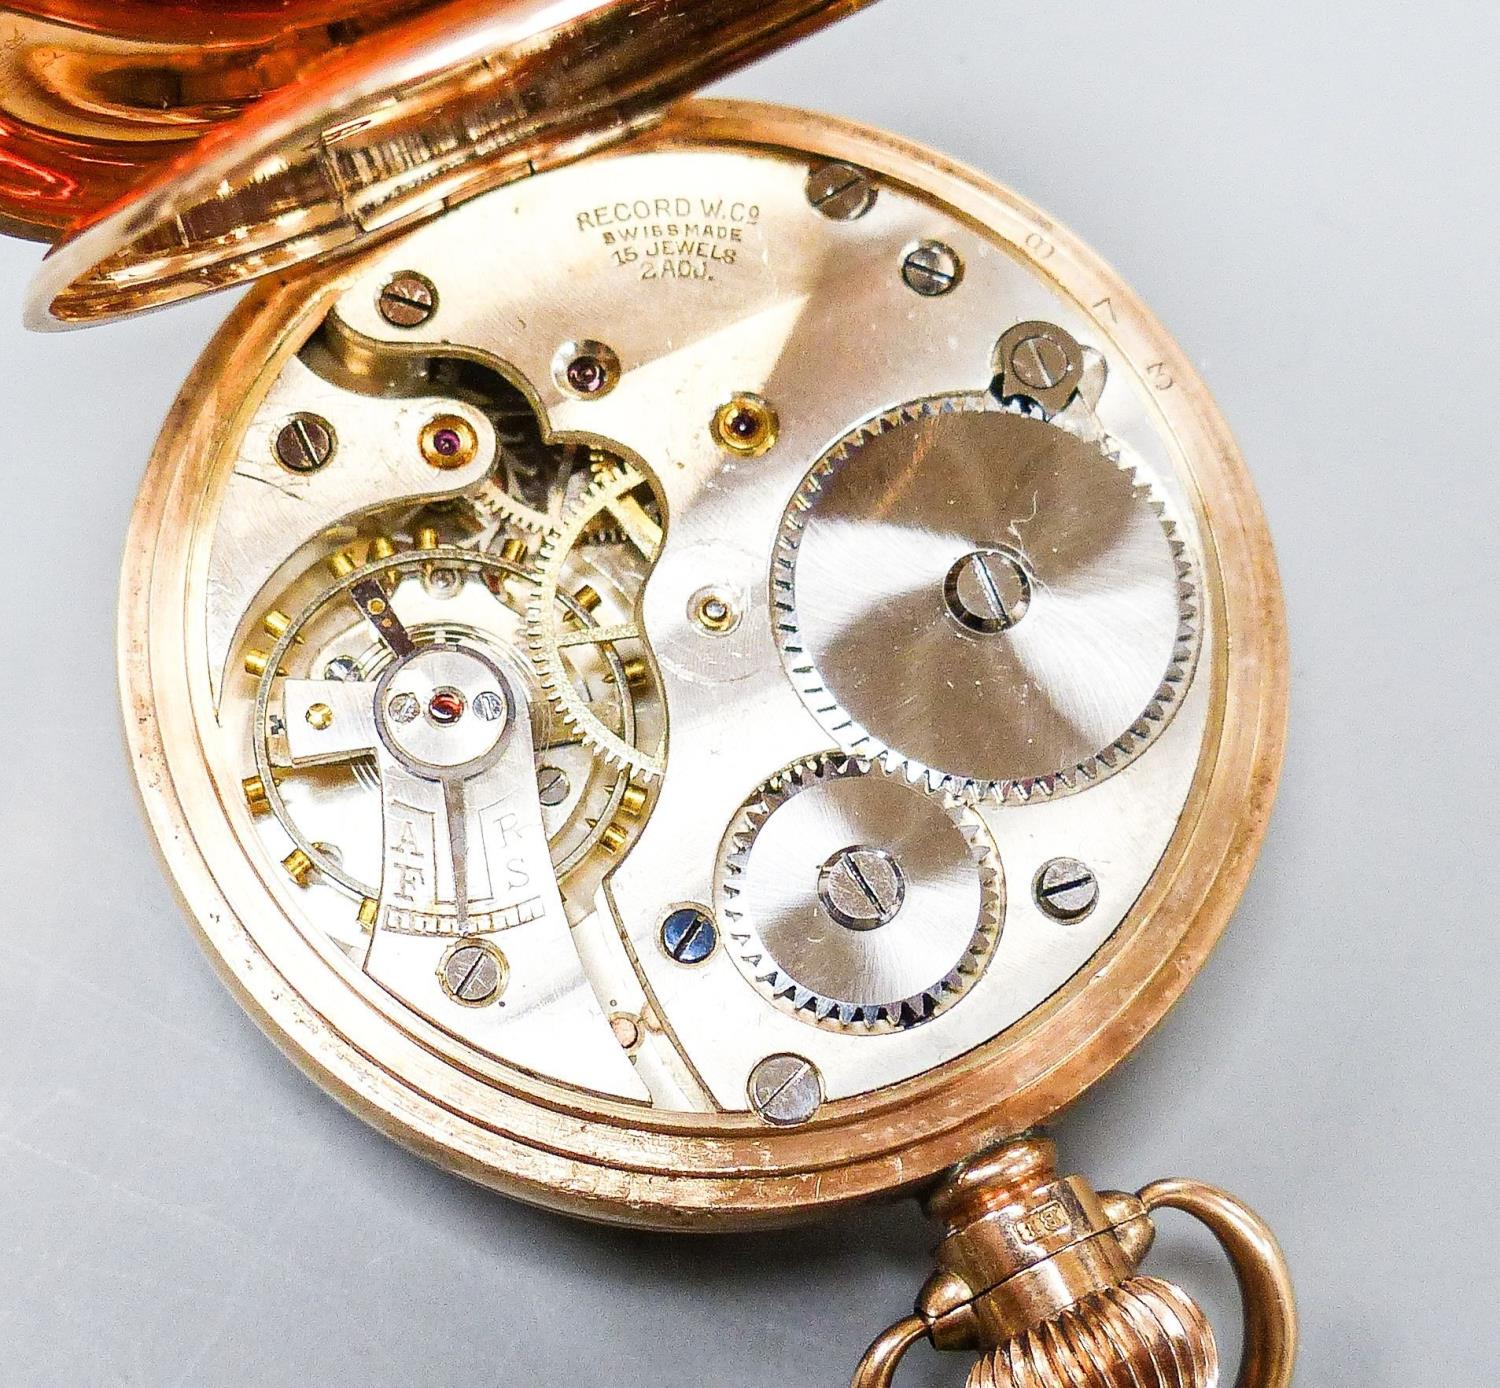 An early 20th century Swiss 9ct gold open faced keyless pocket watch, movement signed Record W. - Image 3 of 4